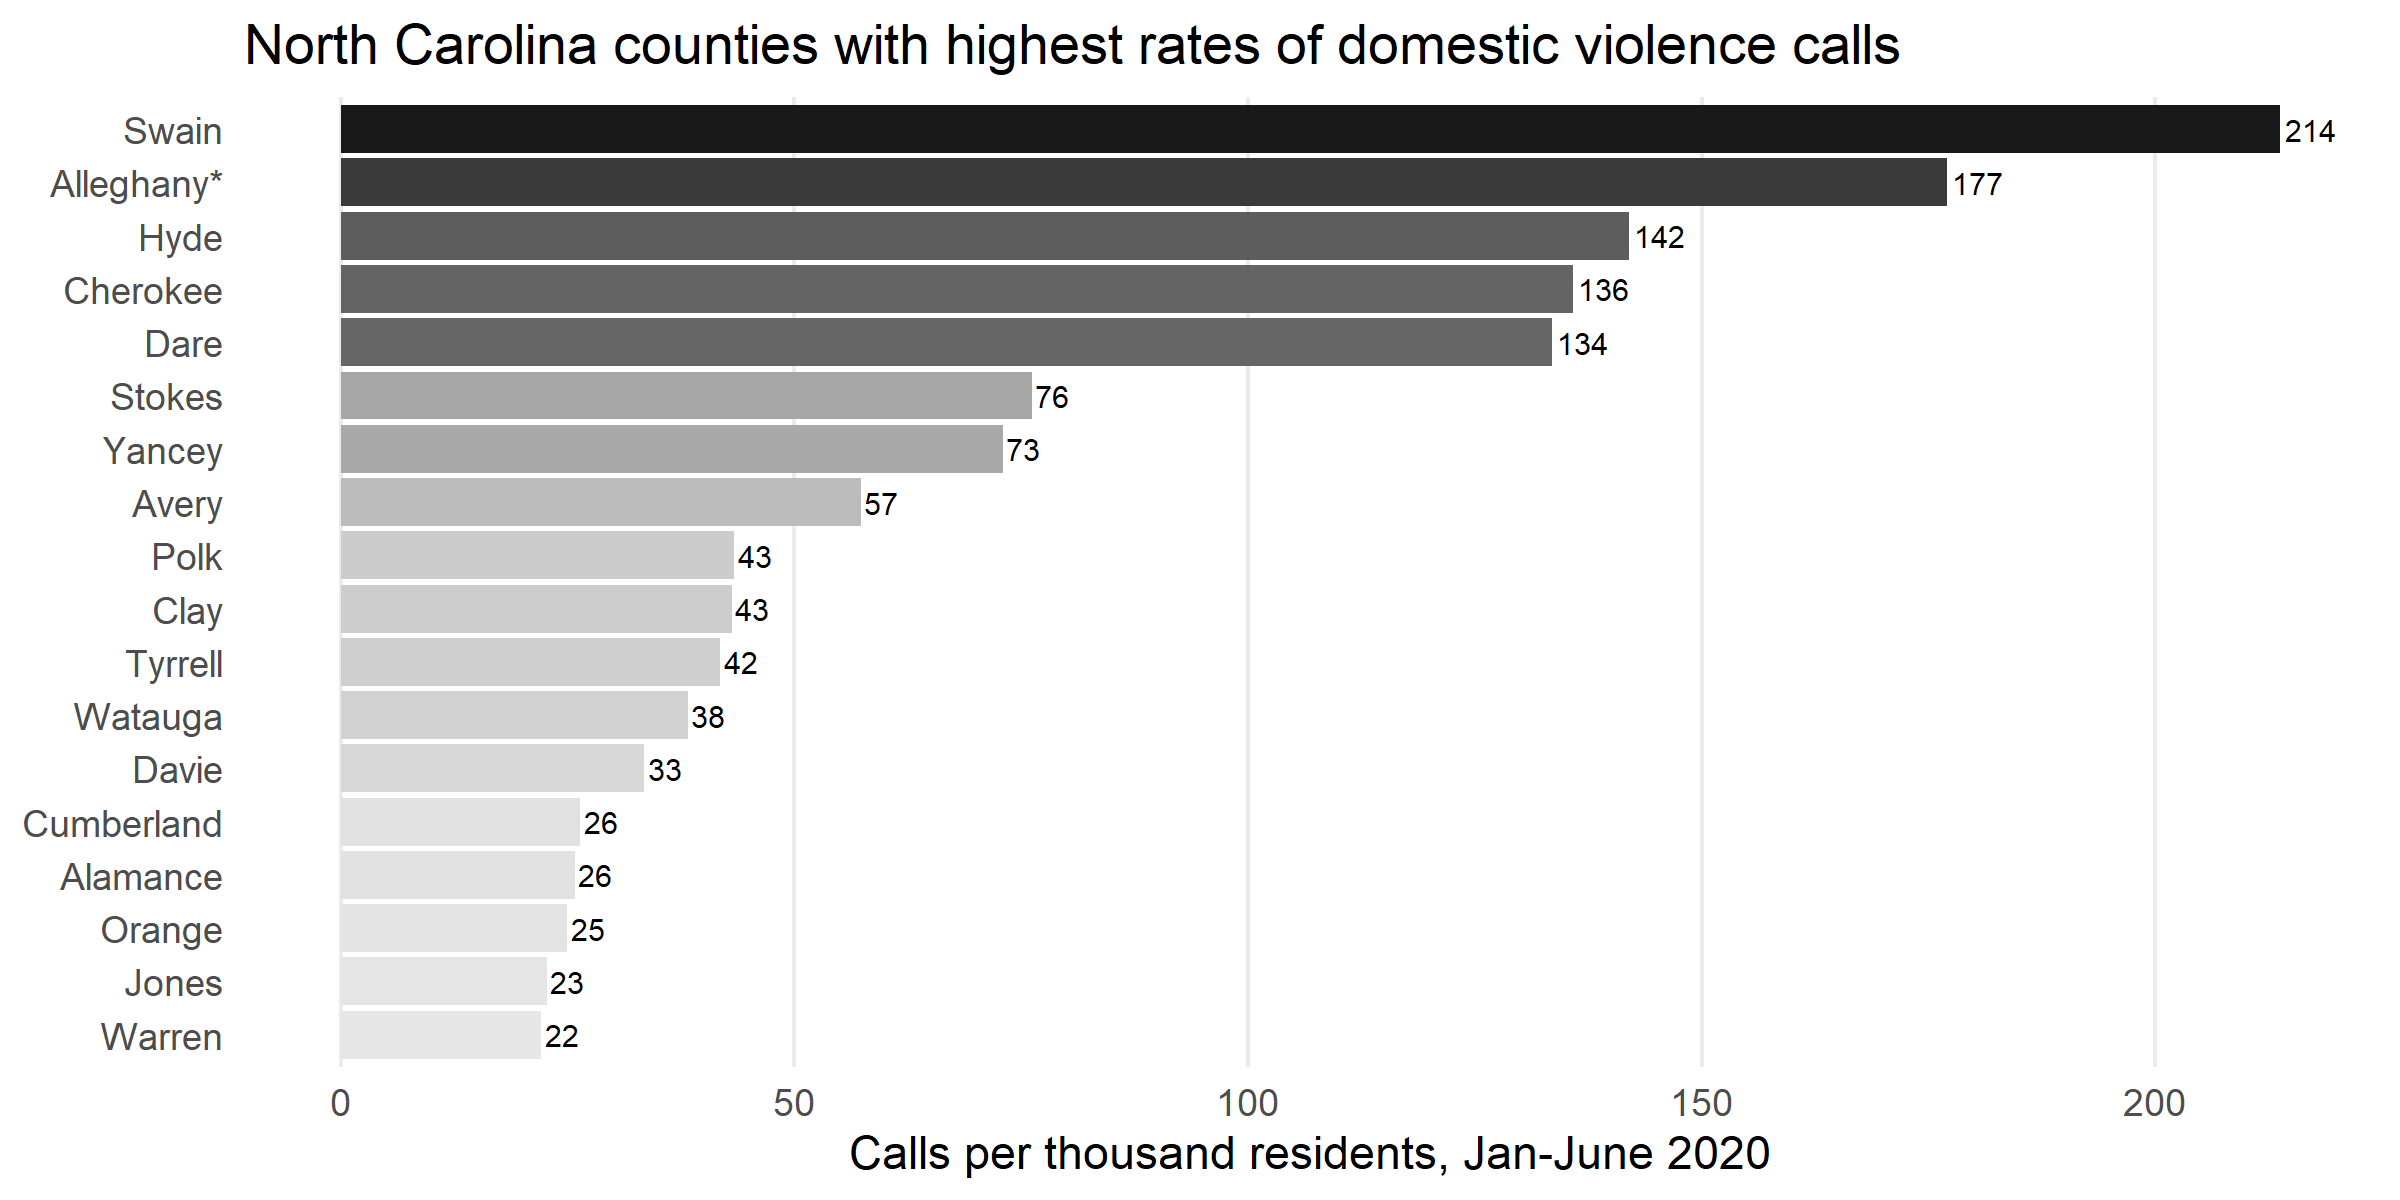 A bar chart displaying the 18 counties' rates of domestic violence-related calls during the January through July 2020 reporting period. In descending order. The displayed counties are Swain, ALleghany, Hyde, Cherokee, Dare, Stokes, Yancey, Avery, Polk, Clay, Tyrrell, Watauga, Davie, Cumberland, Alamance, Orange, Jones, and Warren